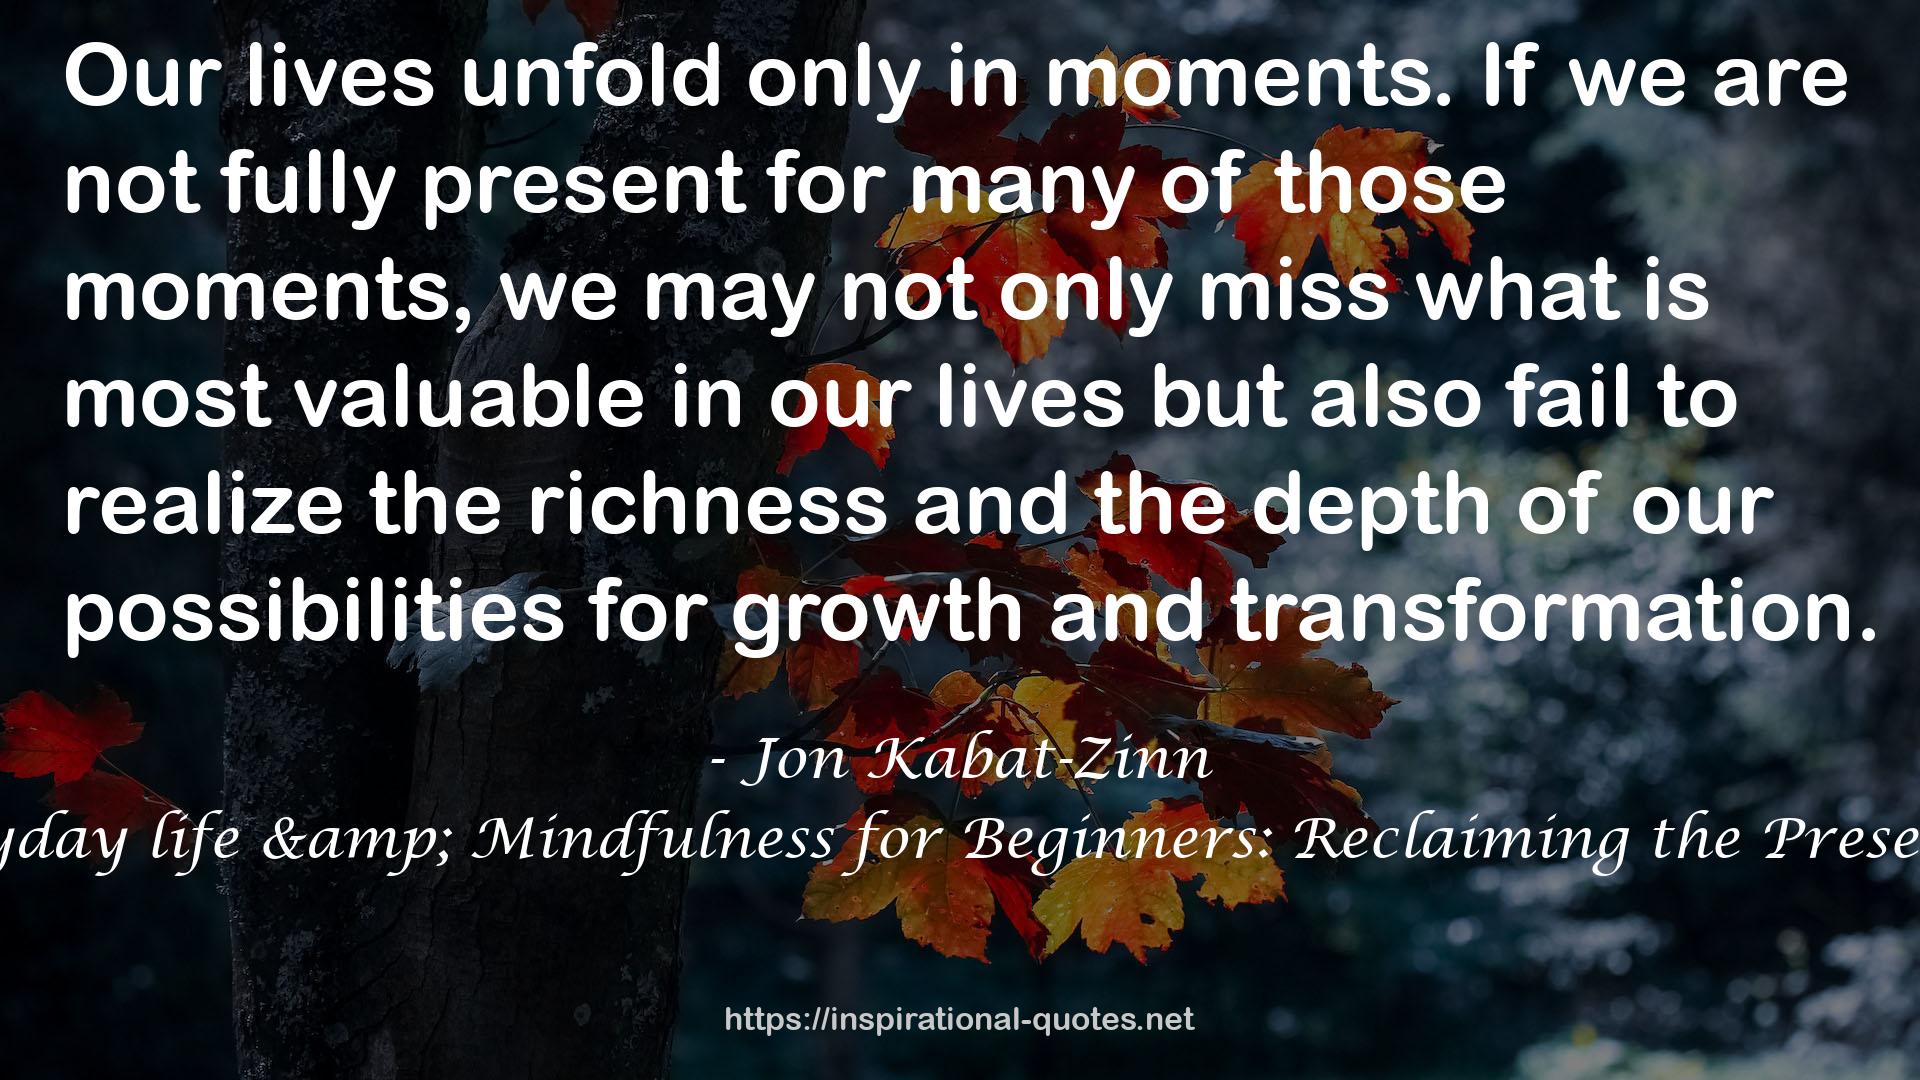 Wherever You Go There You Are: Mindfulness meditation for everyday life & Mindfulness for Beginners: Reclaiming the Present Moment and Your Life By Jon Kabat-Zinn 2 Books Collection Set QUOTES